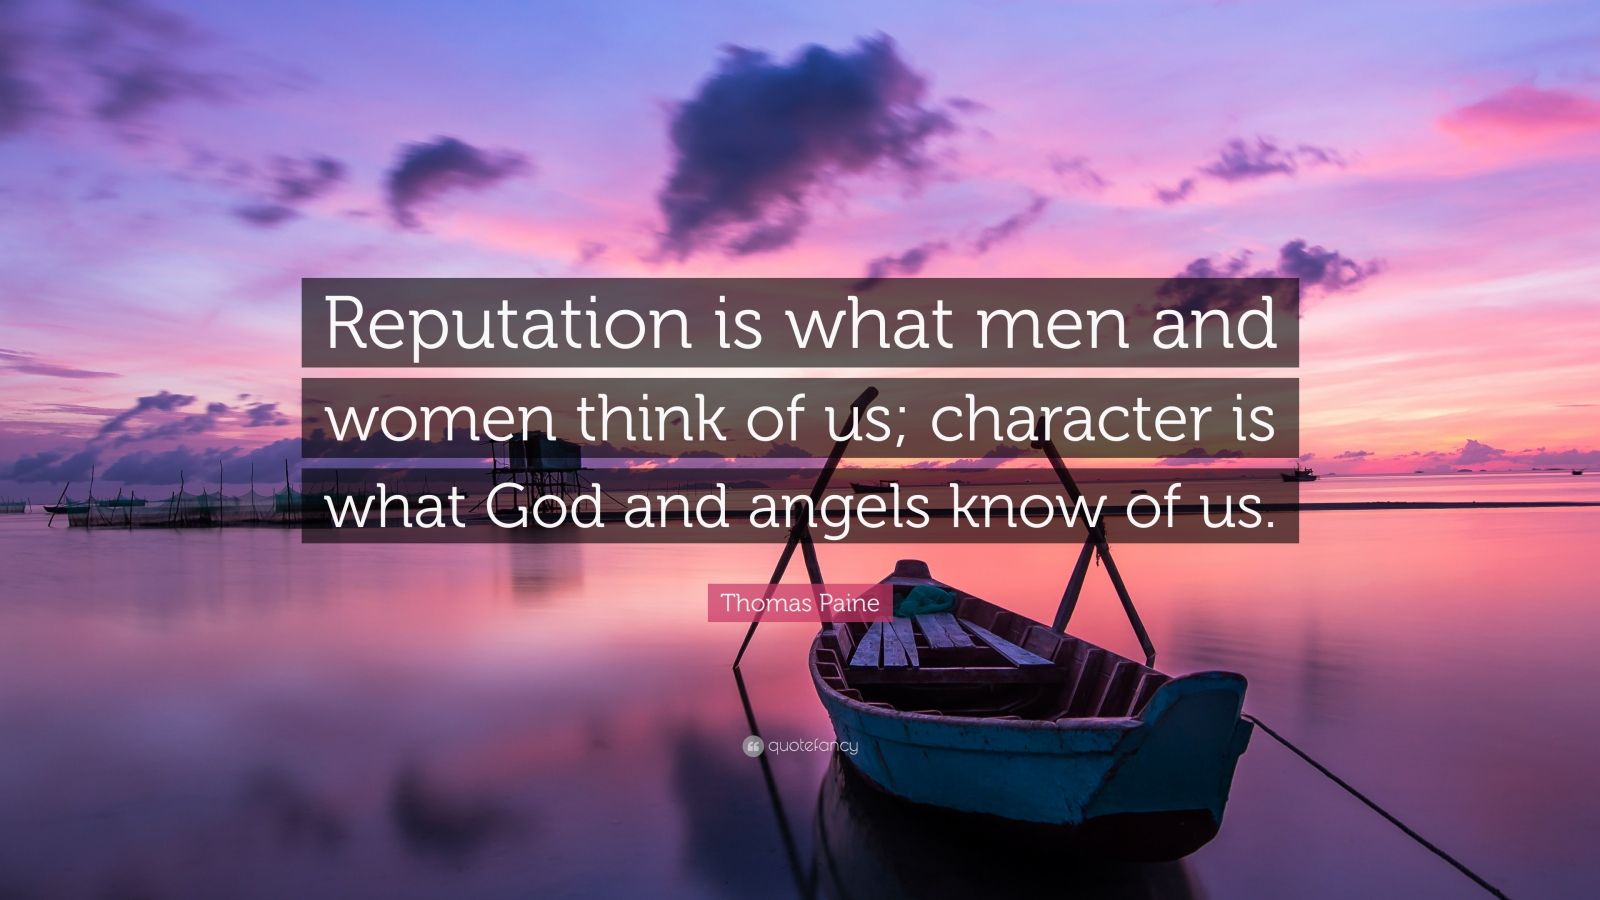 Thomas Paine Quote: “Reputation is what men and women think of us; character is what ...